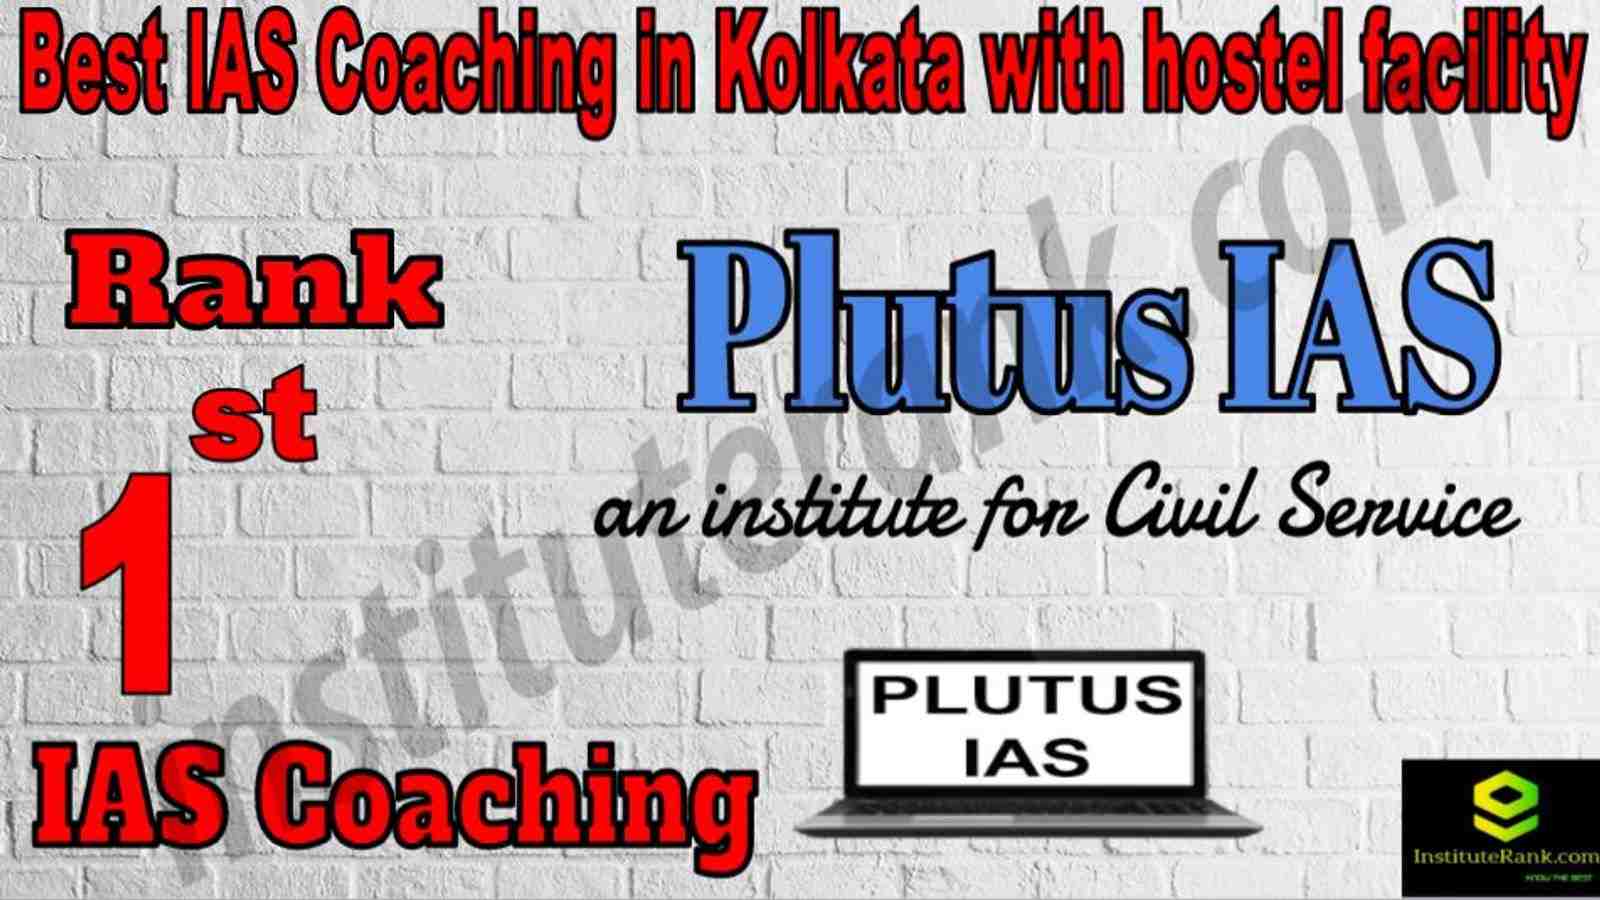 1st Best IAS Coaching in Kolkata with hostel facility